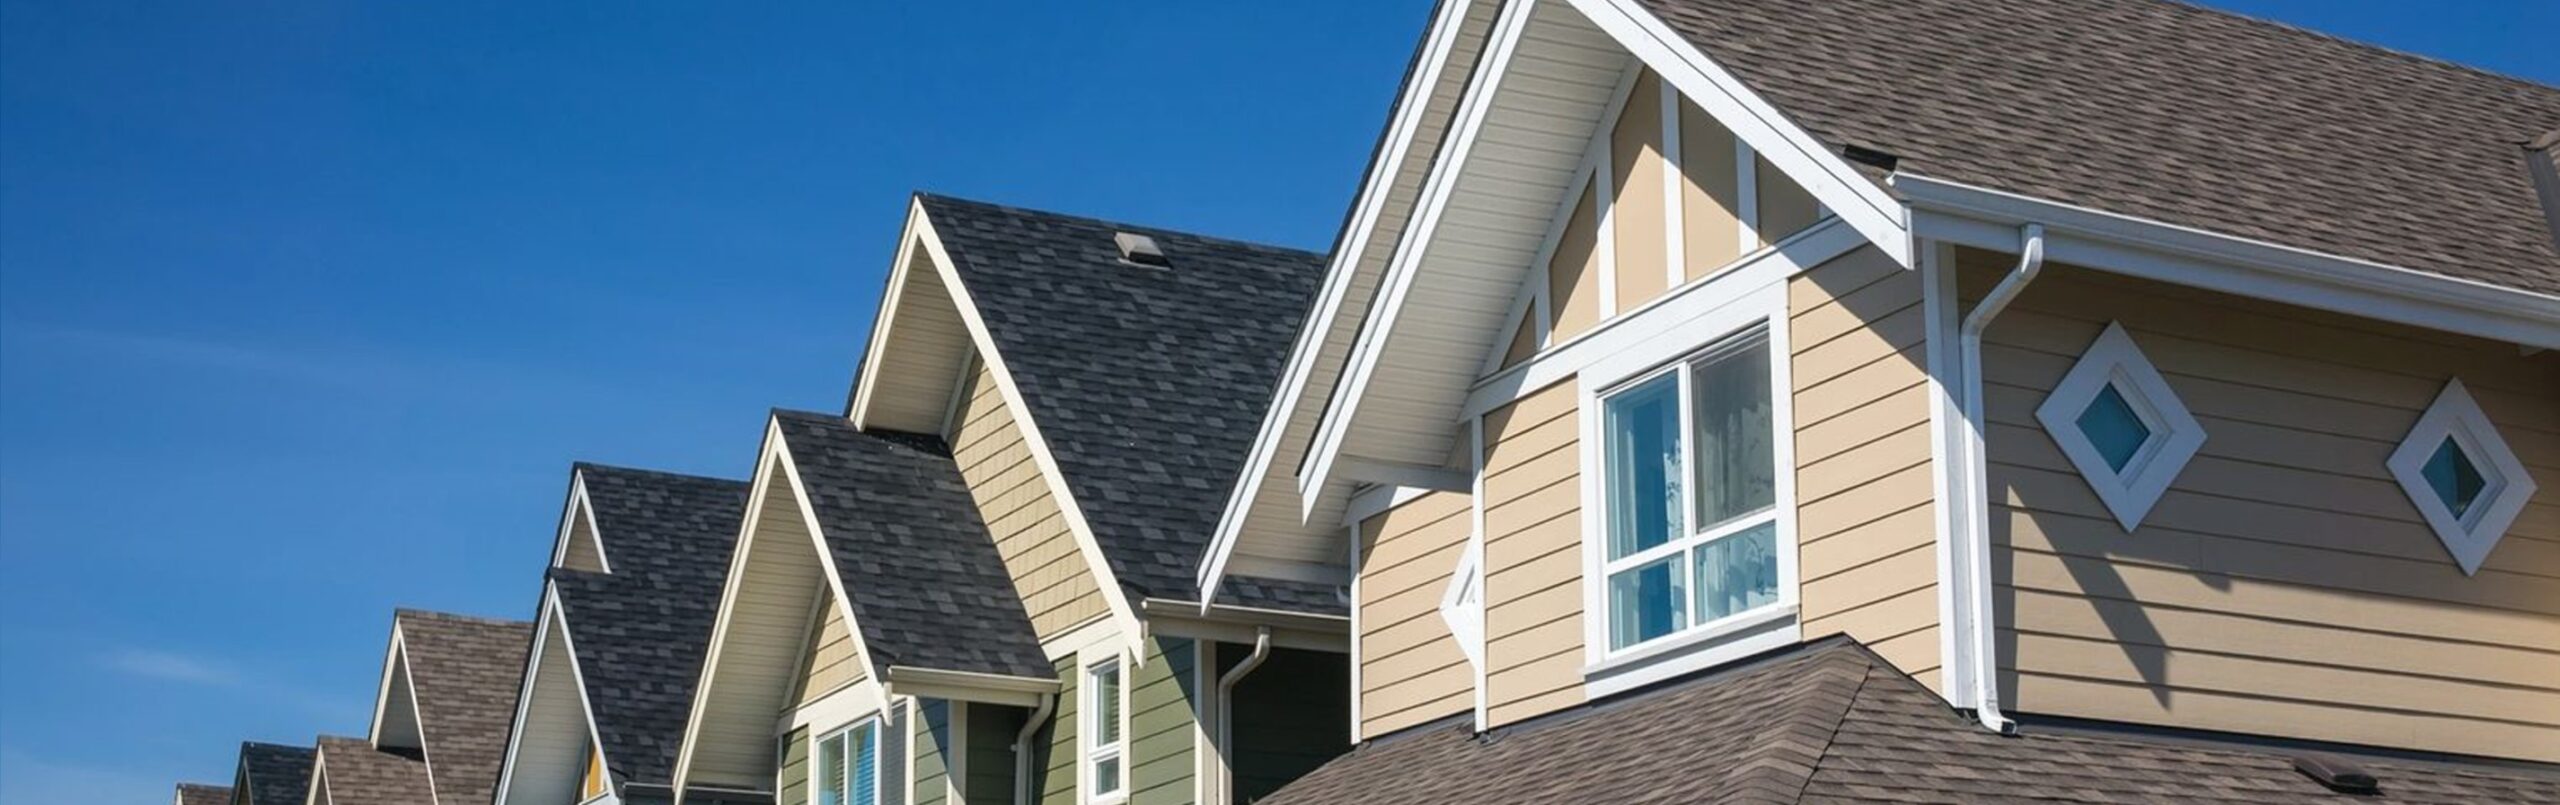 Affordable Residential Roofing